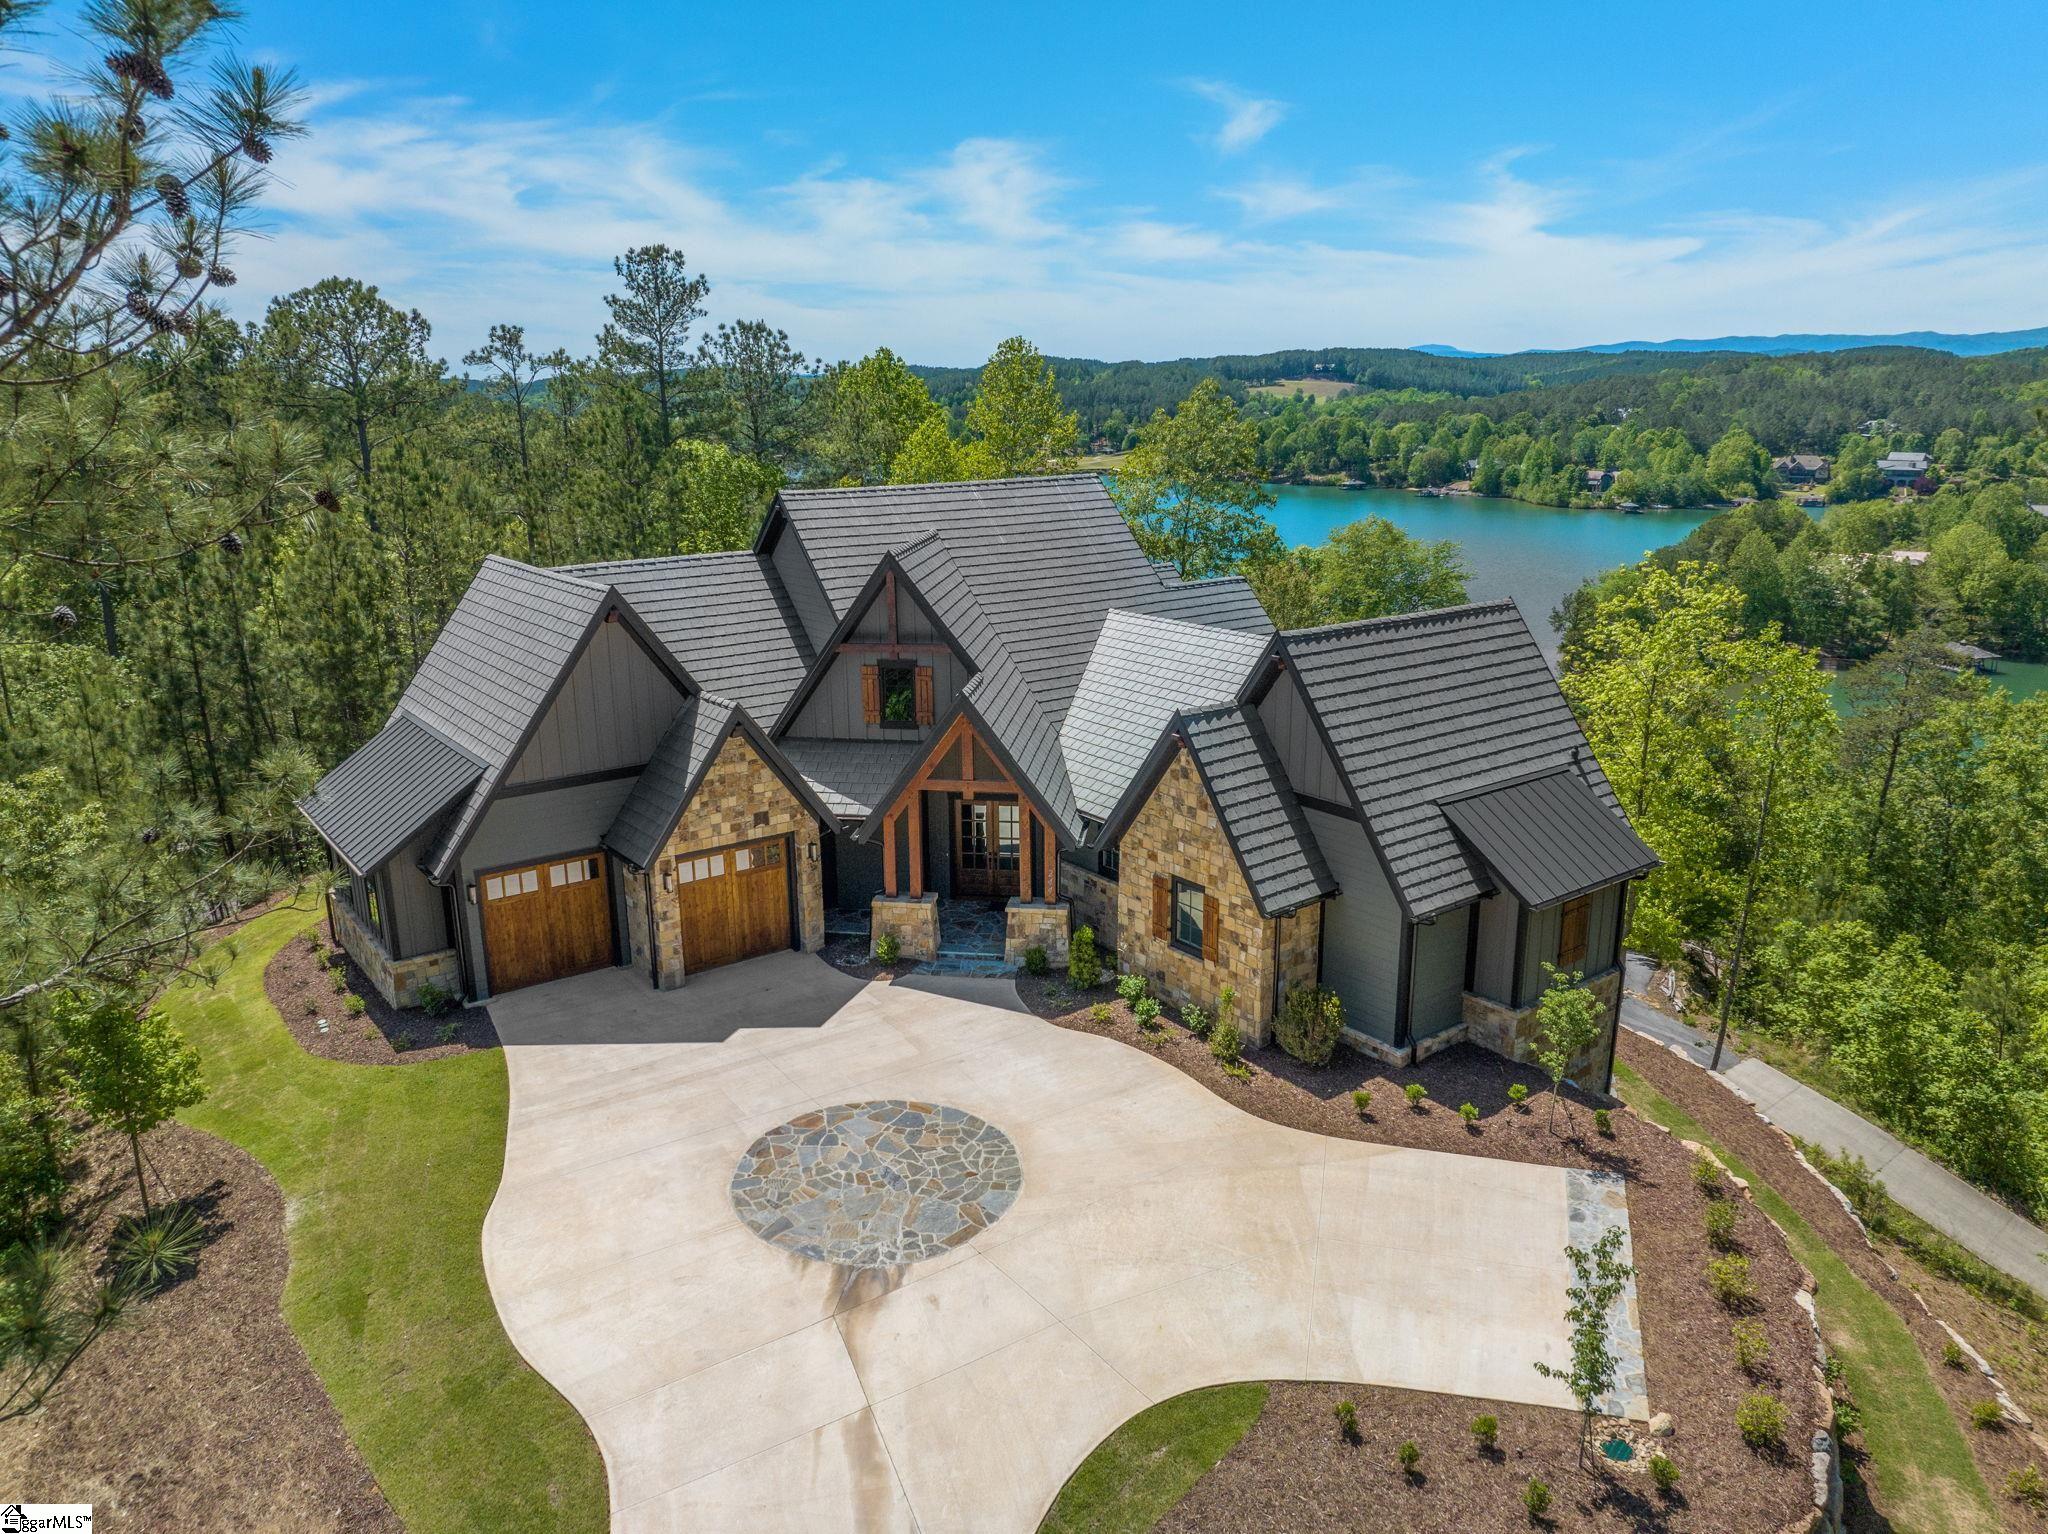 BRAND NEW home with plunge pool and lake/mountain views!! If you have been searching for that elusive Lake Keowee home with A VIEW, this is it! Views! Views! Views! This brand new, custom 4600 sf home in The Reserve, crafted by Arcon Architects & Builders, sits high up on very private acre lot overlooking crystal clear Lake Keowee and the great Smokey Mountains. Attention to detail is everywhere! Custom stonework, conditioned heated plunge pool with retractable cover, expansive decks with gas fireplaces, and so much more! MAIN LEVEL master suite, with his and hers separate bathrooms and walk-in closets designed with direct access to the main level deck. The easy open-flow living/dining combination includes gourmet kitchen, ideal for entertaining, with a stunning granite island, Thermador appliances, and a unique scullery with its own prep area and sink, double ovens, and abundant custom cabinetry. A step away is the Great Room with its stone-encased electric fireplace, built-in display shelving, unique ceiling design with wood inlays, and floor-to-ceiling sliding glass doors with transom windows. The TERRACE LEVEL begins at its center with a spacious rec/sitting room opening directly to the covered patio, outdoor fireplace, and plunge pool. On one side, there is a full guest suite with private bath and patio access, with an additional guest suite with breakfast bar, bonus room and full bath at the other end. Exiting off the pool deck is a terrace level mudroom with a half bath and is plumbed for an additional washer/dryer. There is also existing plumbing and drain for an outdoor shower if desired. Loads of custom storage space, an unfinished safe room, and built-in shaft for a future elevator completes this level. There are thoughtful design features throughout: A two-car garage with ample space for work benches and storage including an elevated roof on one side designed for the installation of a car lift. Entering from the garage, there is a mudroom, walk-in coat room, and a large laundry. The lower-level mechanical room even has its own entrance. Private, gated Reserve at Lake Keowee offers a Jack Nicklaus Signature Golf Course, a par 3 practice facility with driving range, Clubhouse with fine dining, pub area & wine bar, Fitness Center, Hiking Trails, Har-Tru Clay Tennis Courts, Lakeside Resort-Style Pool and Cabana, Settlement Pool, new Pickleball Courts, Marina offering both slips and boat rentals, and Market great for lunch and select provisions. This community offers many activities including fitness classes, various social clubs, and a high-speed fiber-optic internet system in place. The Reserve at Lake Keowee is a full amenity lakefront golf community. Must see! Start making your memories today! Sports Membership deposit is required at closing. An upgrade to RLK Club premier membership (for golf, fitness, tennis, pickleball) is possible for an additional fee; contact listing agent for details.